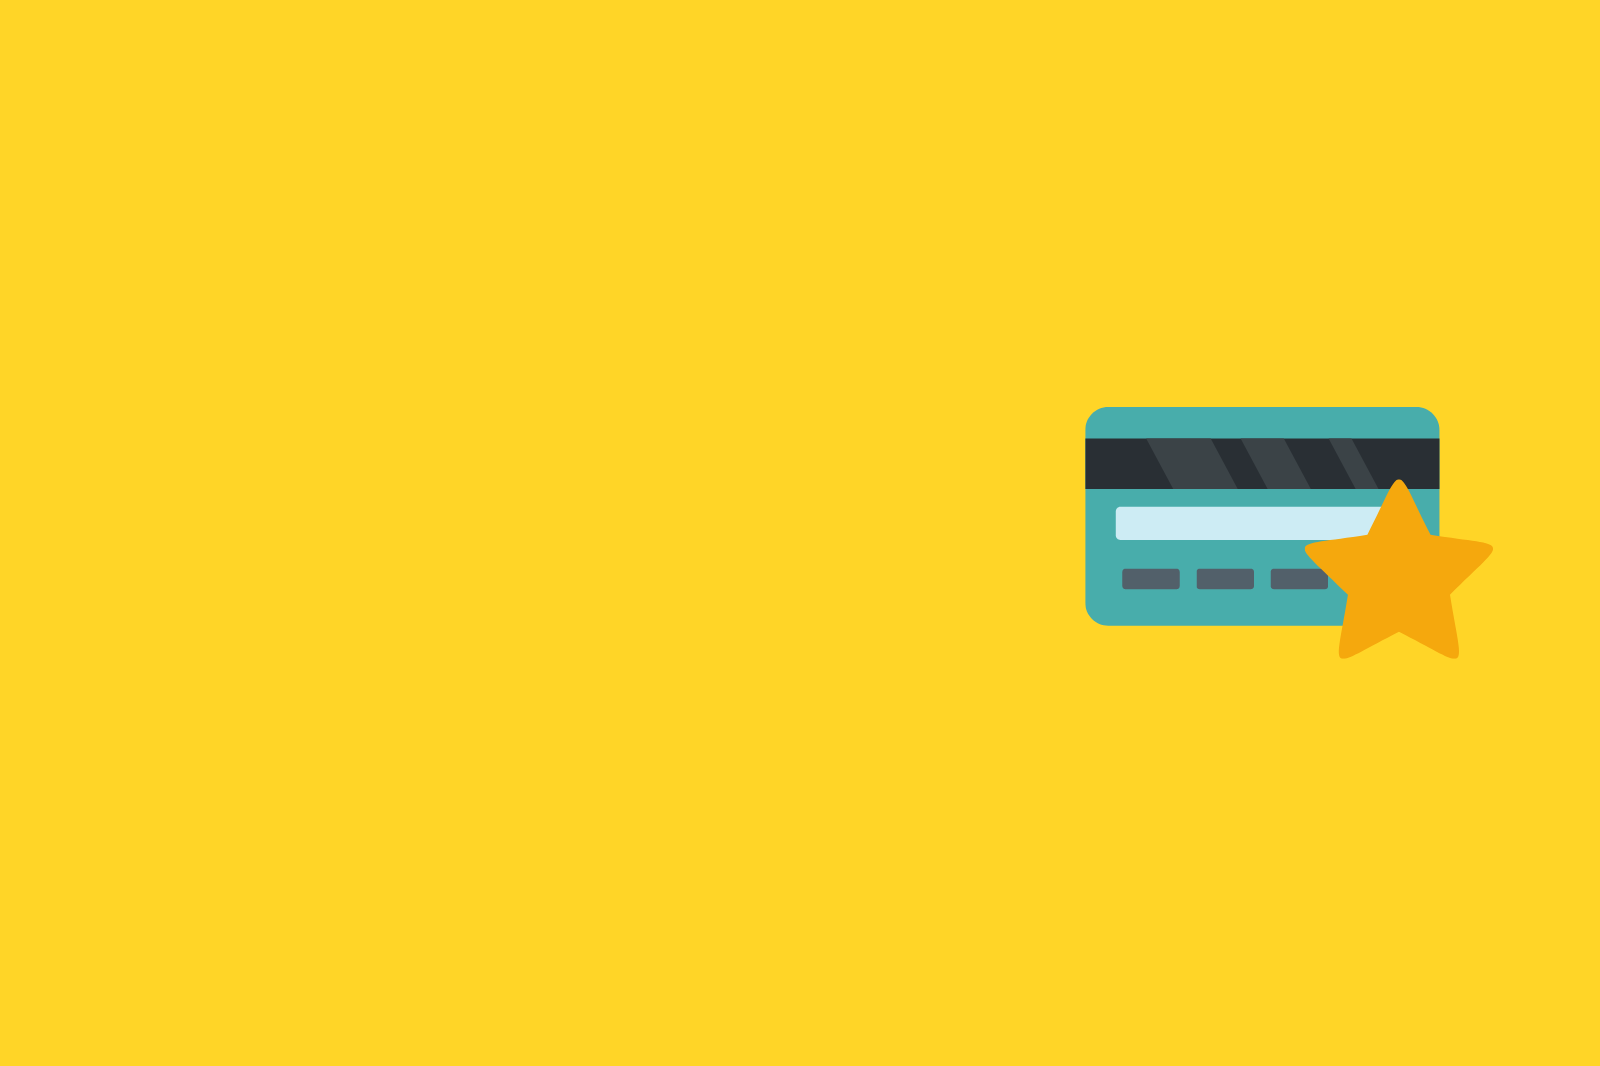 A credit card icon on a yellow background representing retail loyalty.